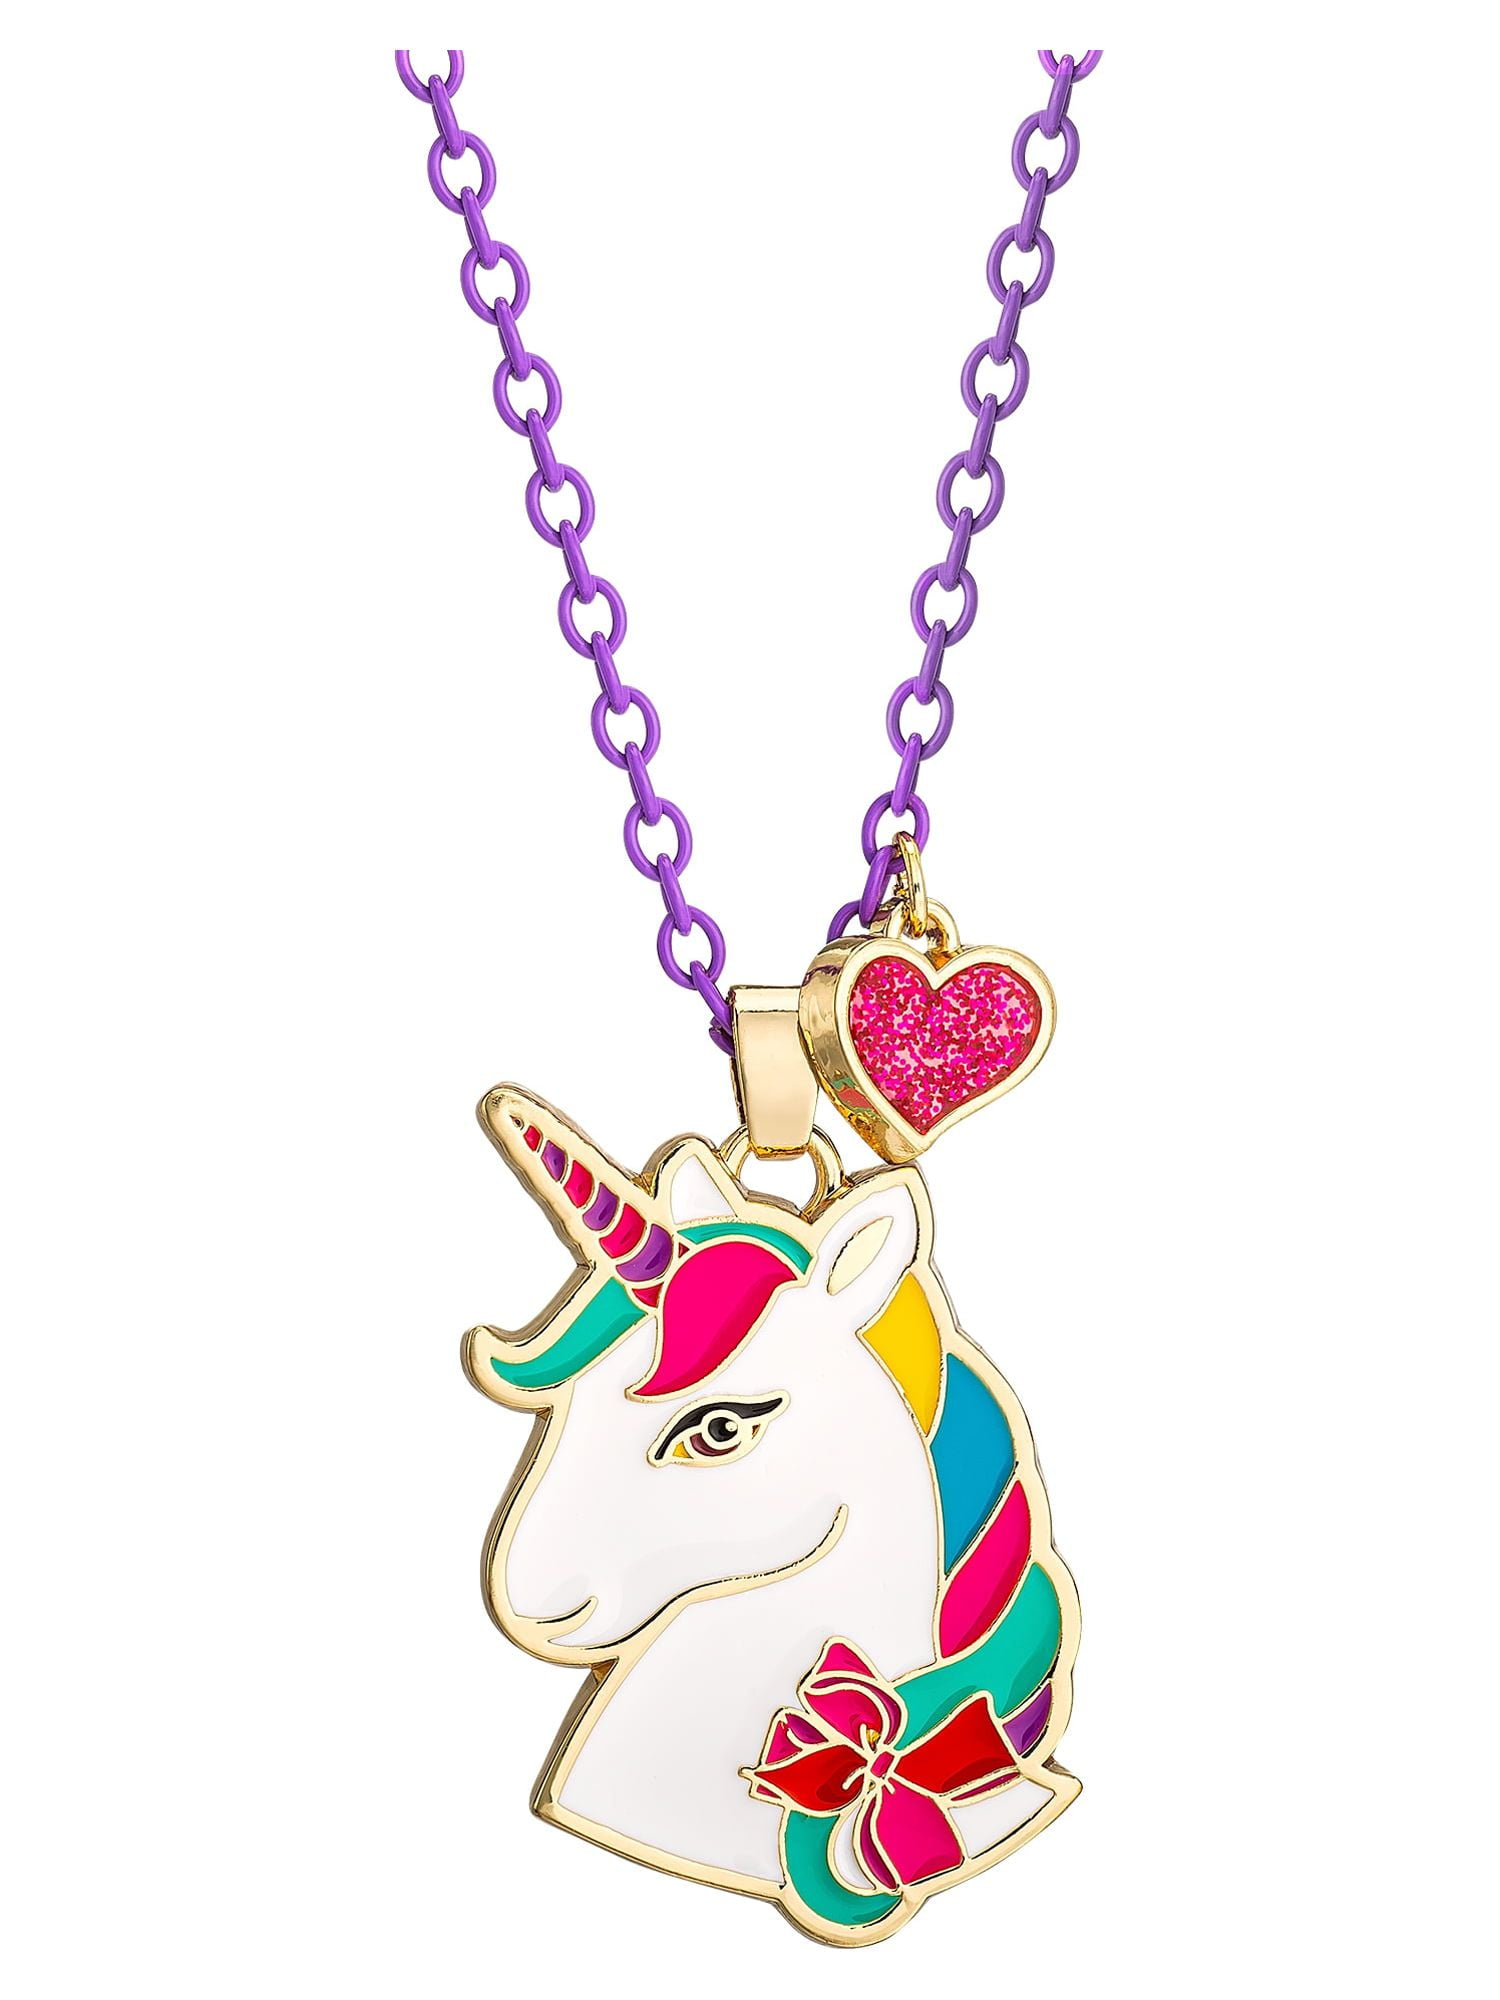 Lovely Cute Unicorn Pendant Necklace Little Girl's Jewelry Gift